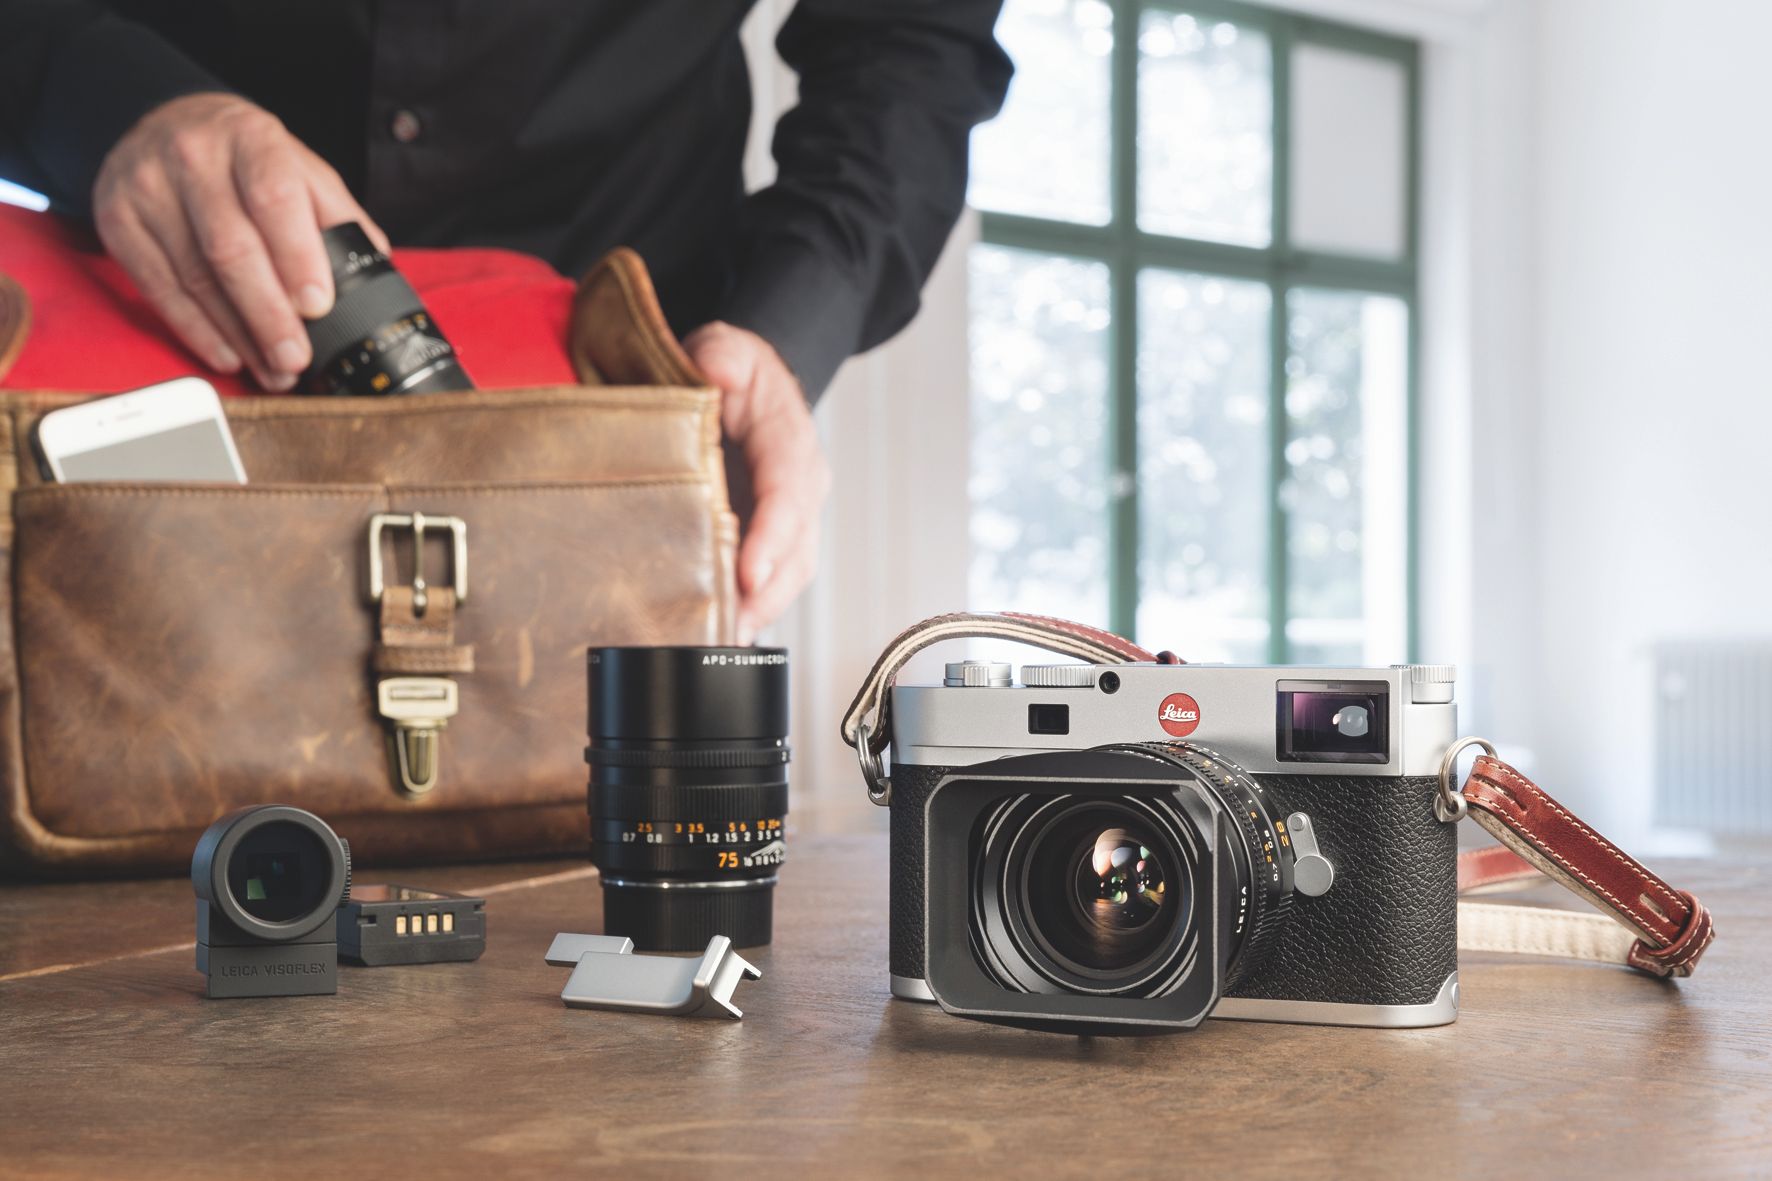 leica s new m10 rangefinder brings the m series into the digital age image 1